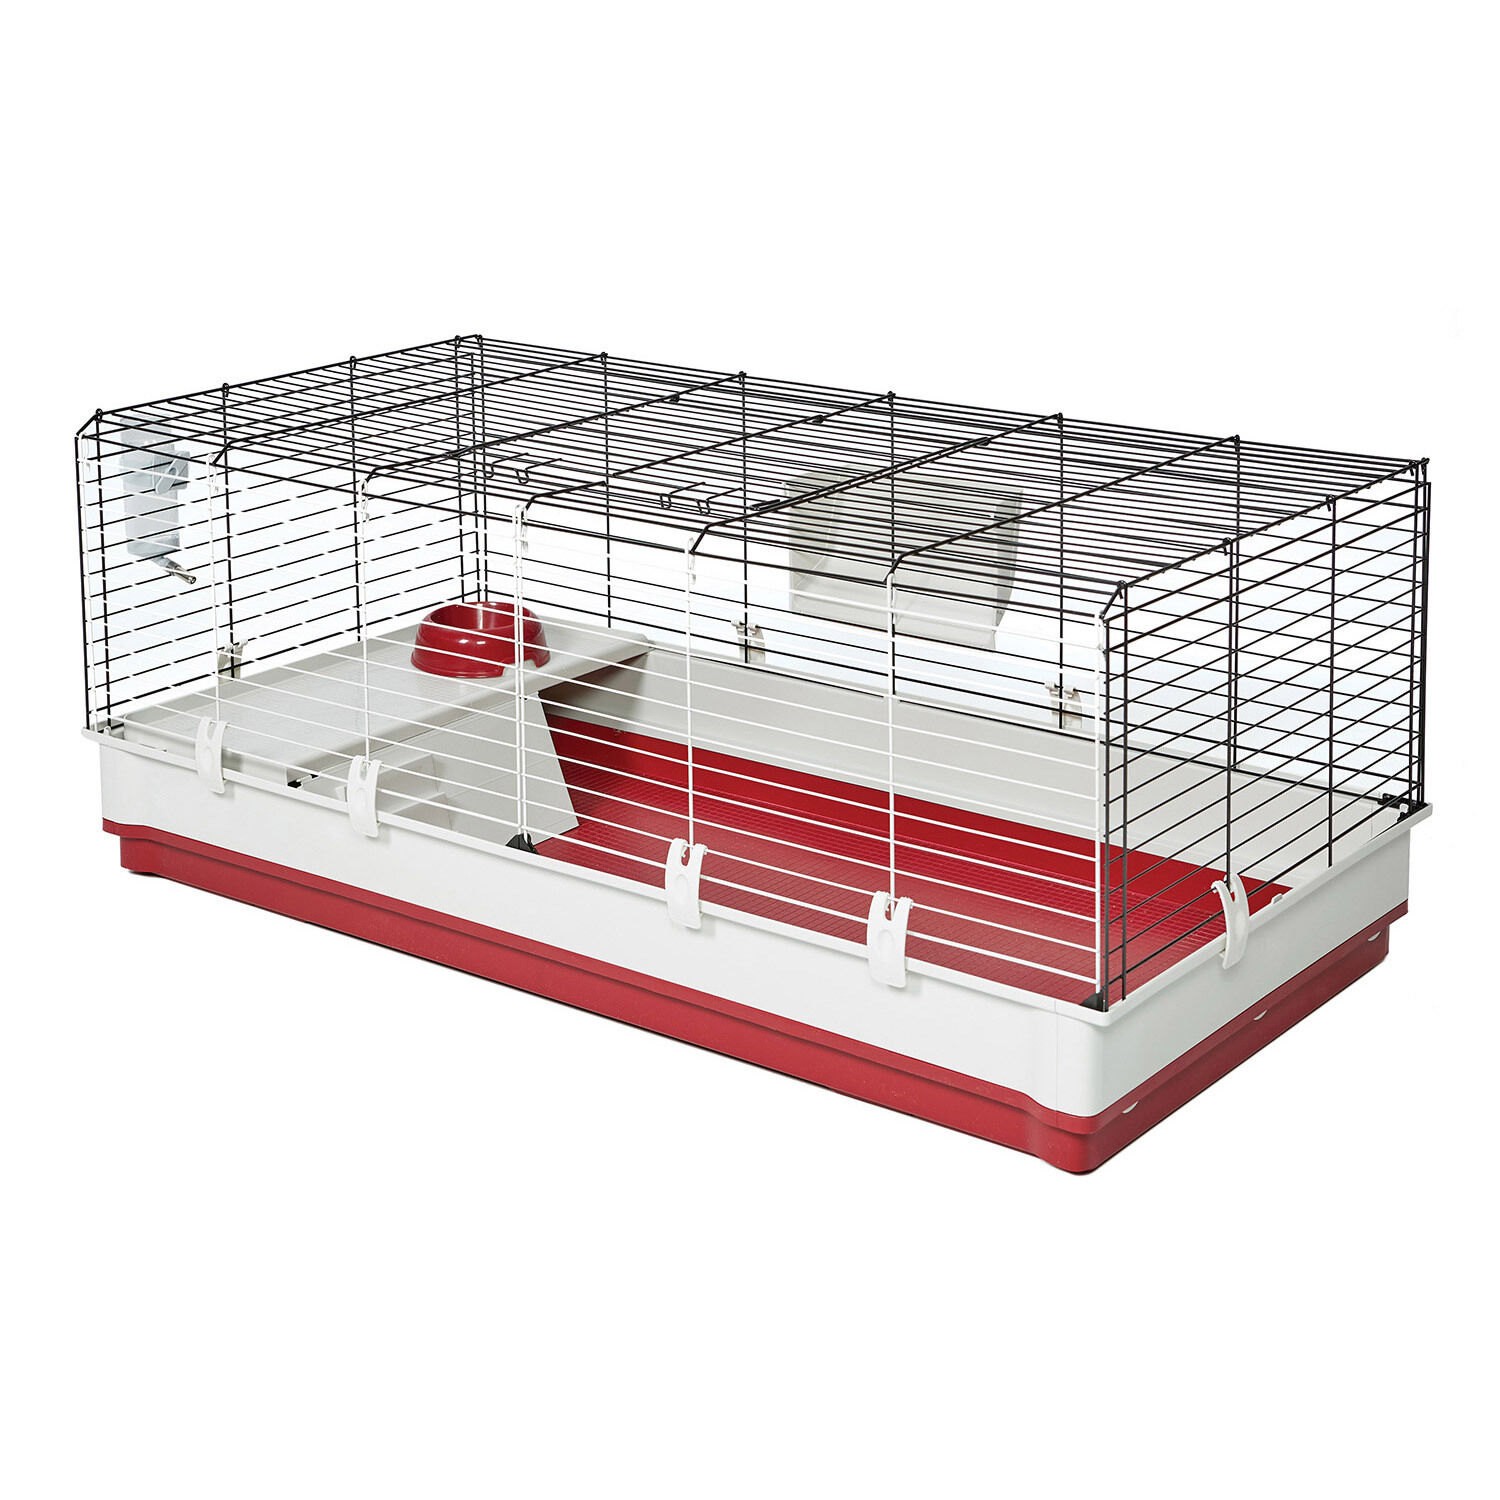 ONLINE ONLY 25% Off Midwest Deluxe Extra Long Rabbit Home Small Animal Habitat 